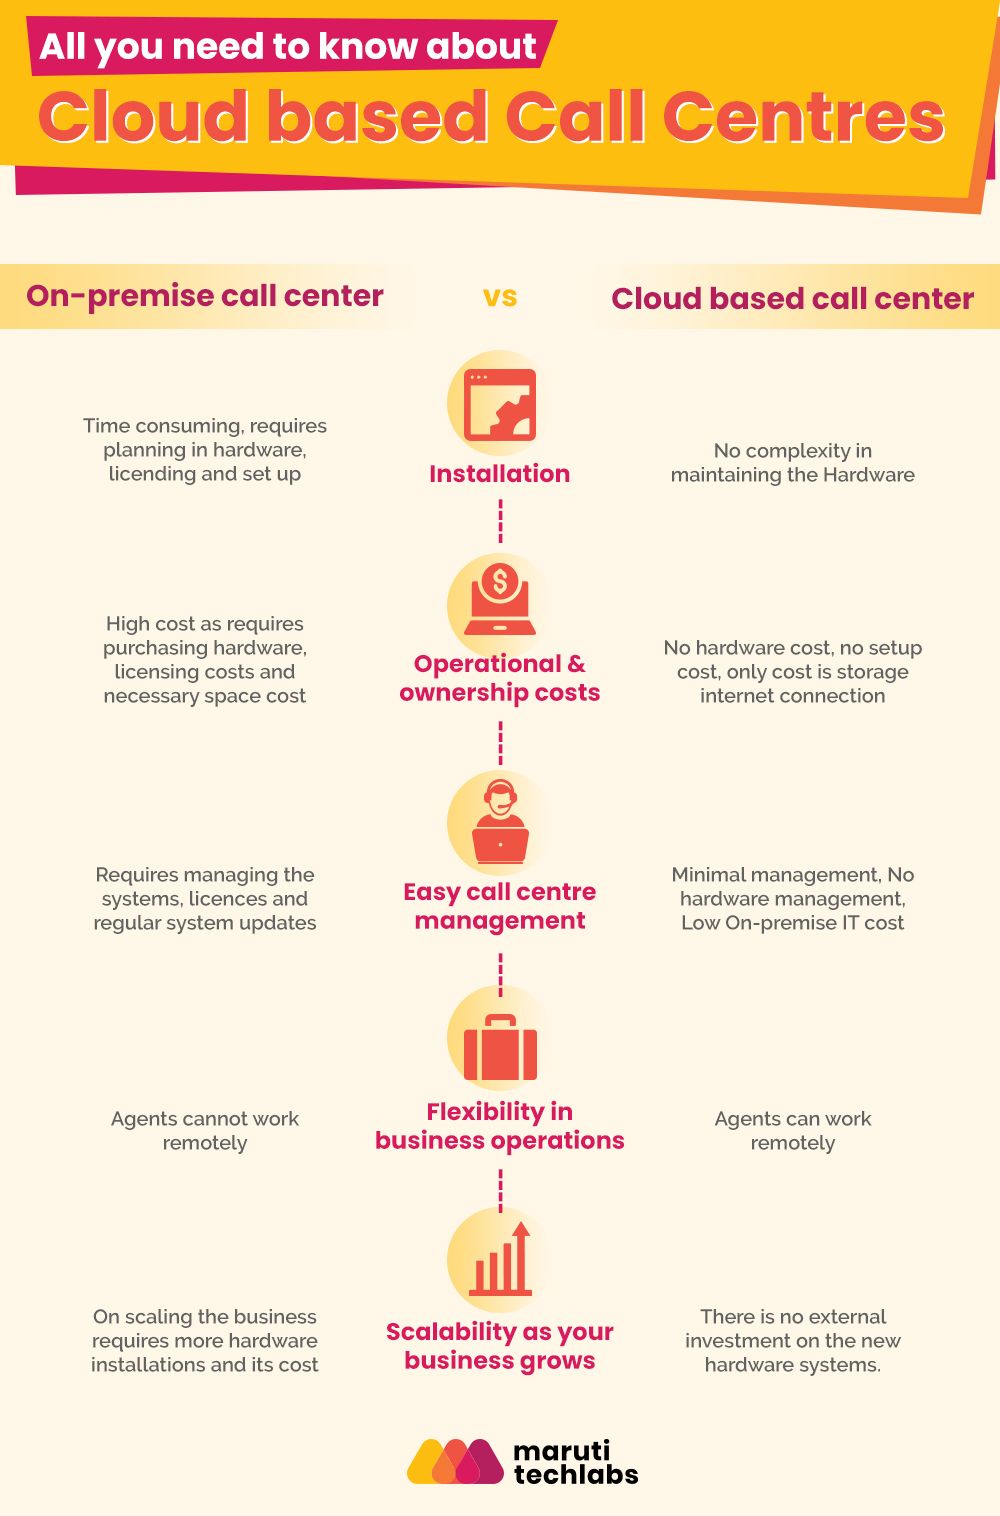 All you need to know about Cloud based Call Centres.